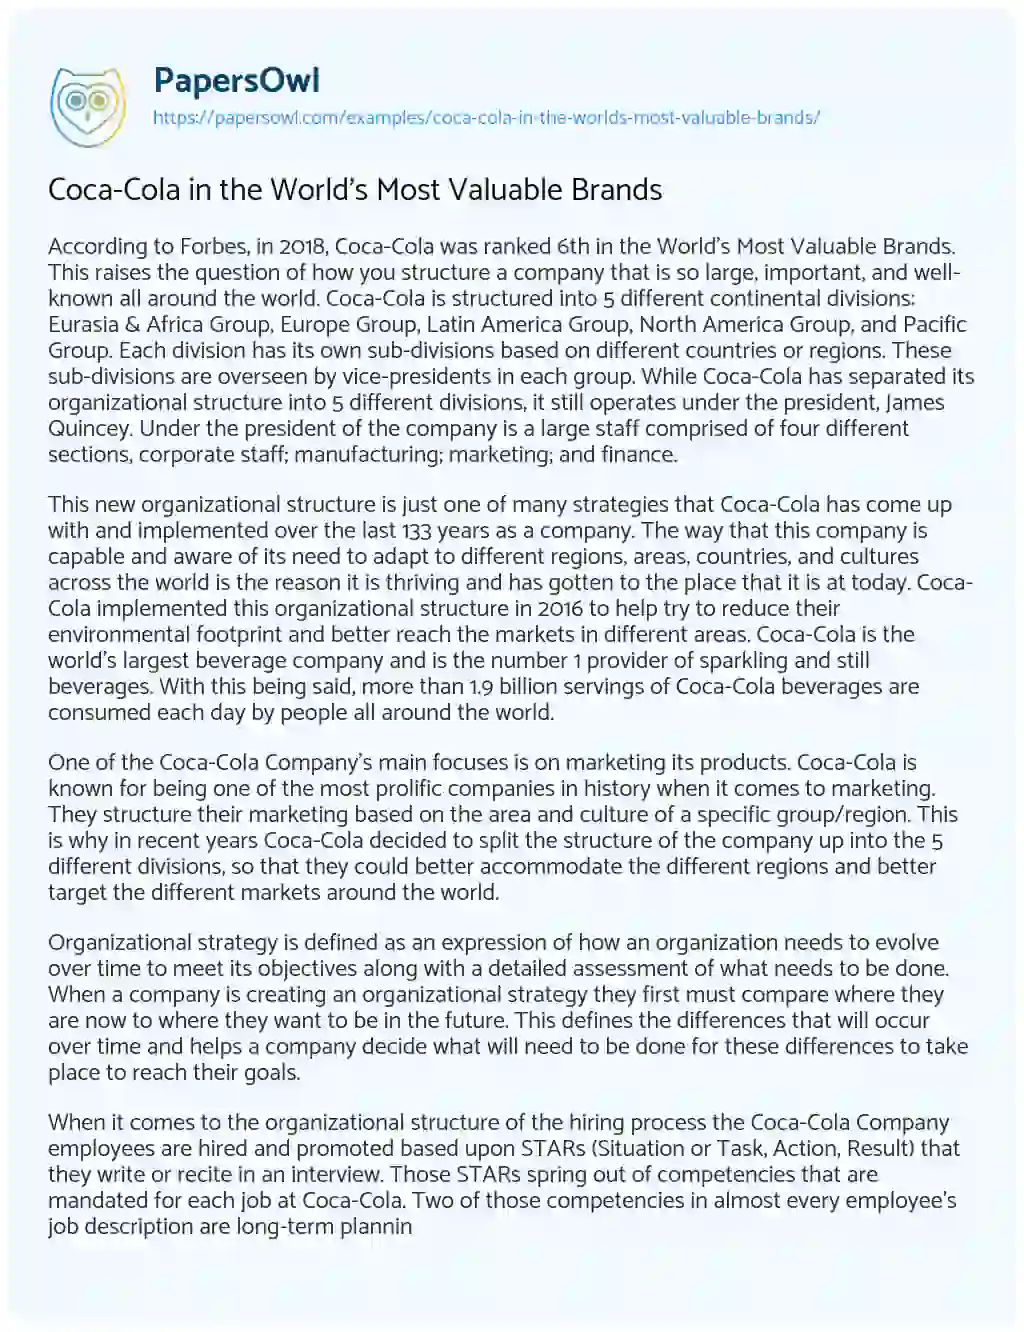 Essay on Coca-Cola in the World’s most Valuable Brands